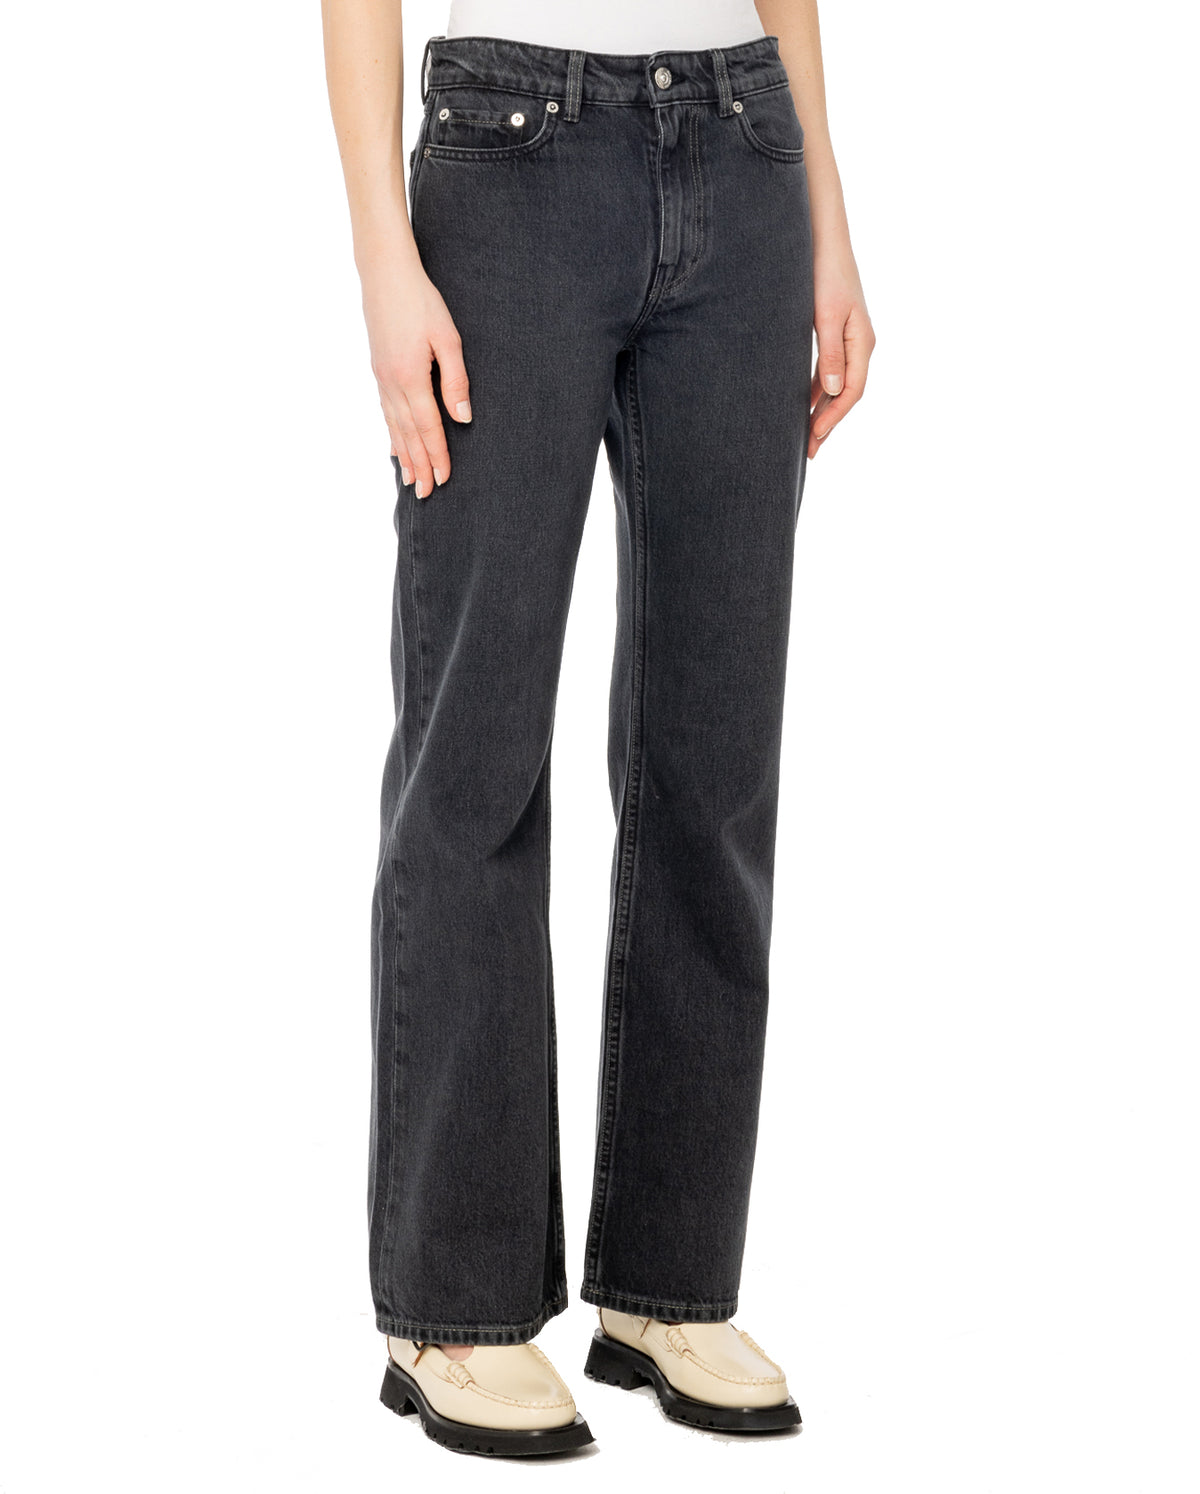 Boot Cut Jeans - Washed Black